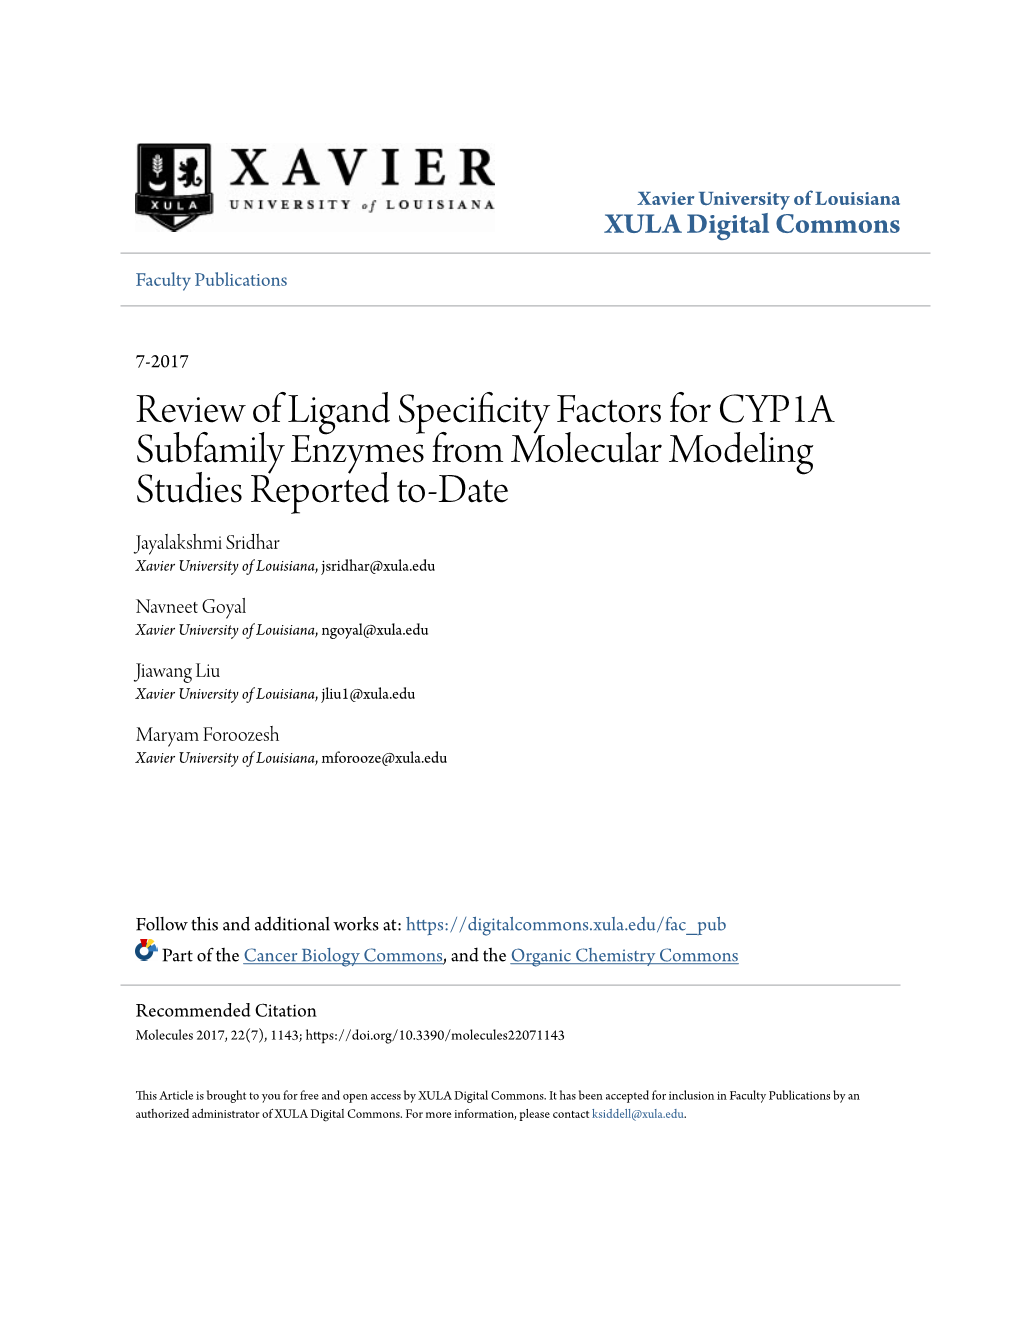 Review of Ligand Specificity Factors for CYP1A Subfamily Enzymes From